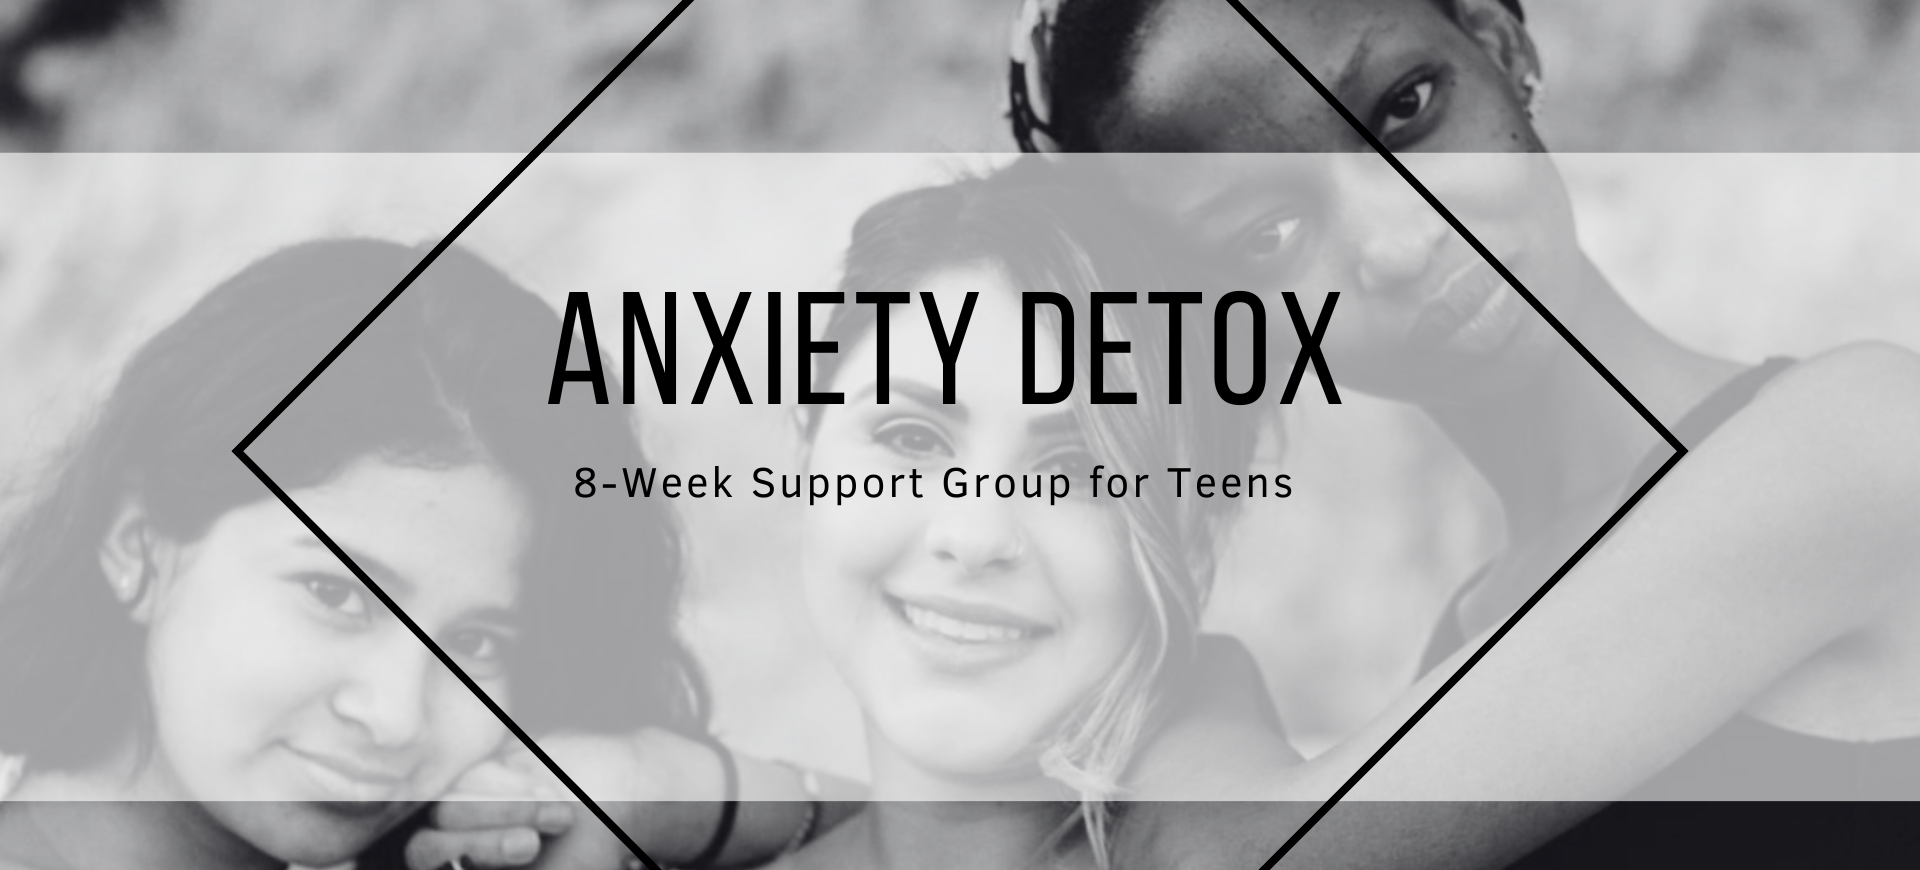 Promotional banner for an "anxiety detox" 8-week support group at our Sherman Oaks wellness center for teens, featuring images of smiling adolescents.